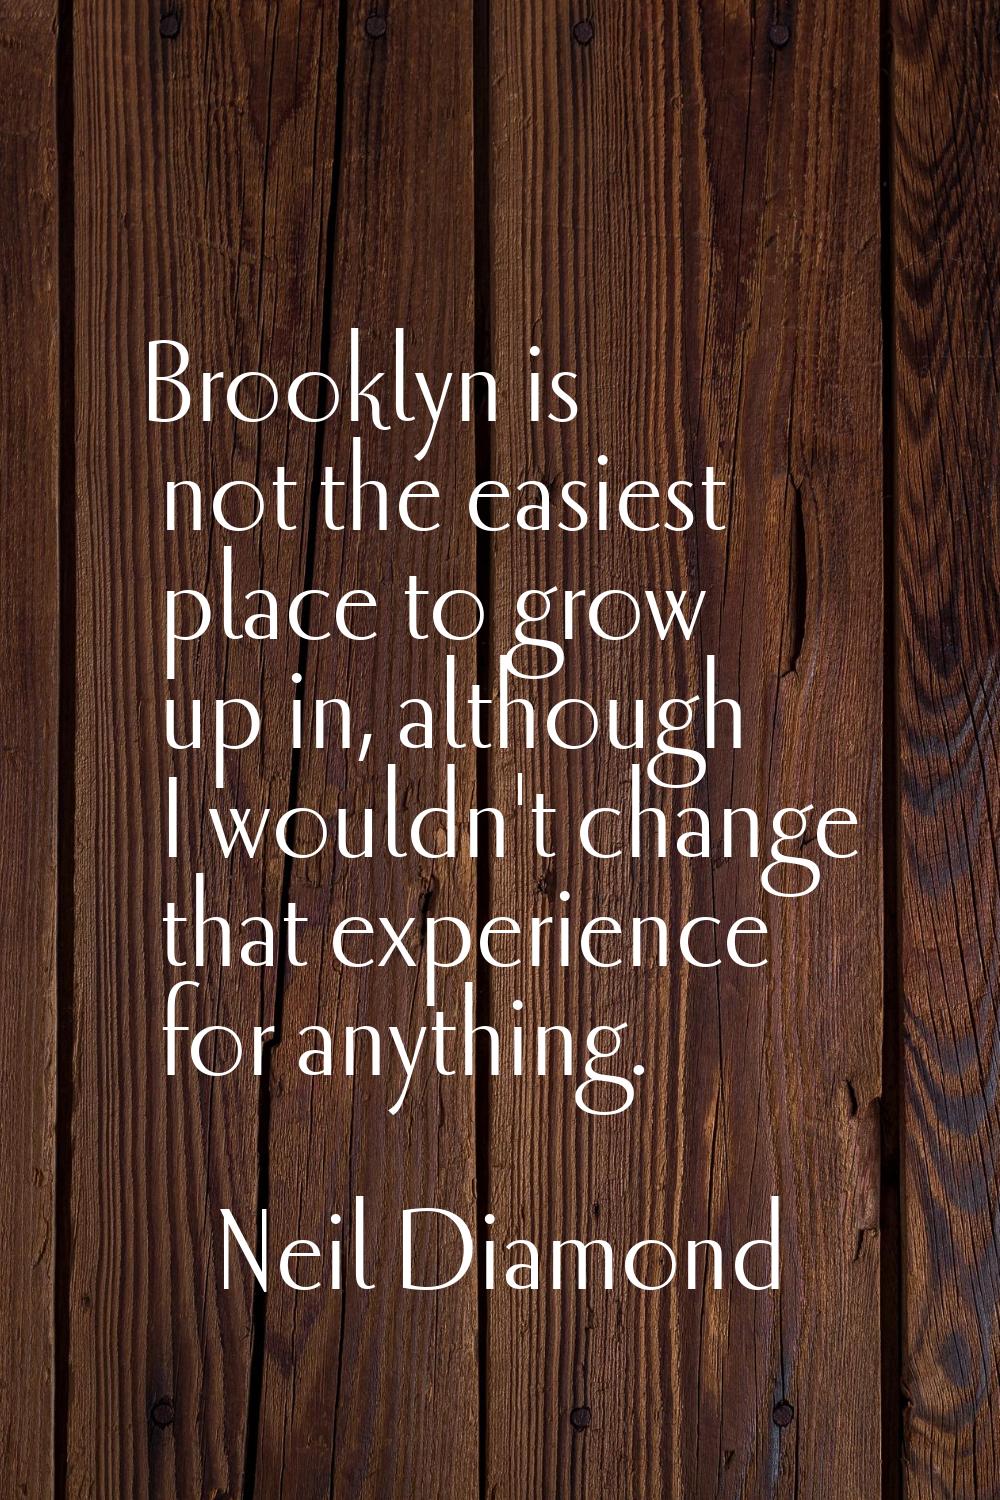 Brooklyn is not the easiest place to grow up in, although I wouldn't change that experience for any